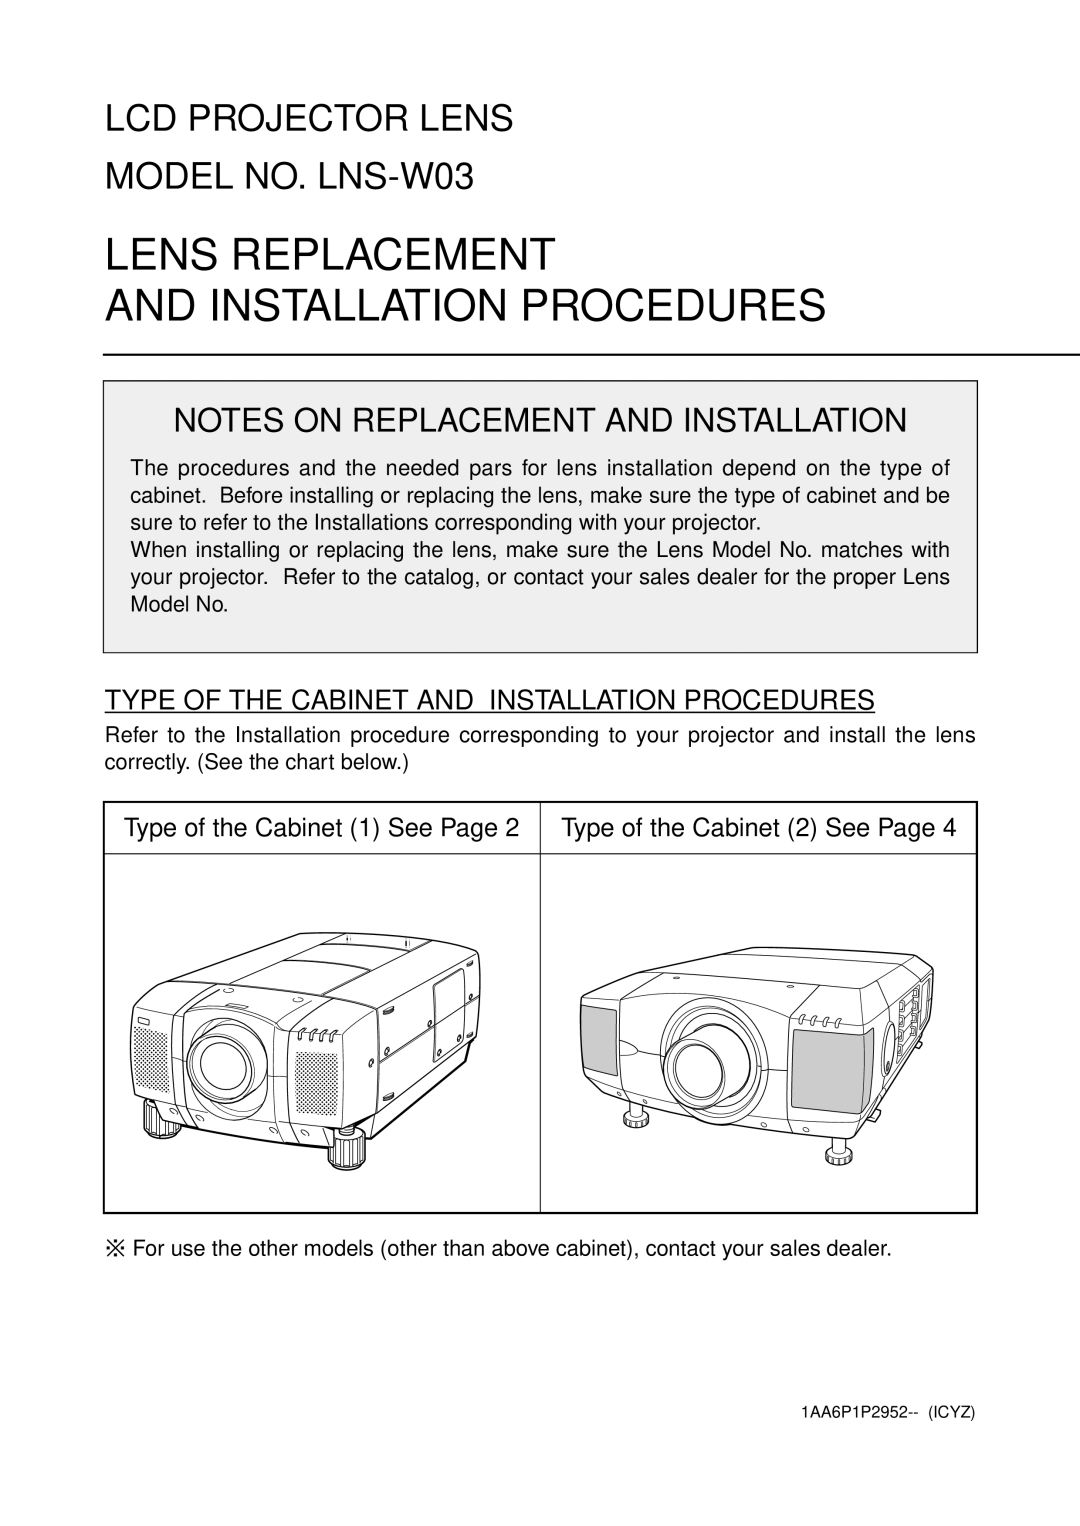 Fisher manual LCD PROJECTOR LENS MODEL NO. LNS-W03, Notes On Replacement And Installation 